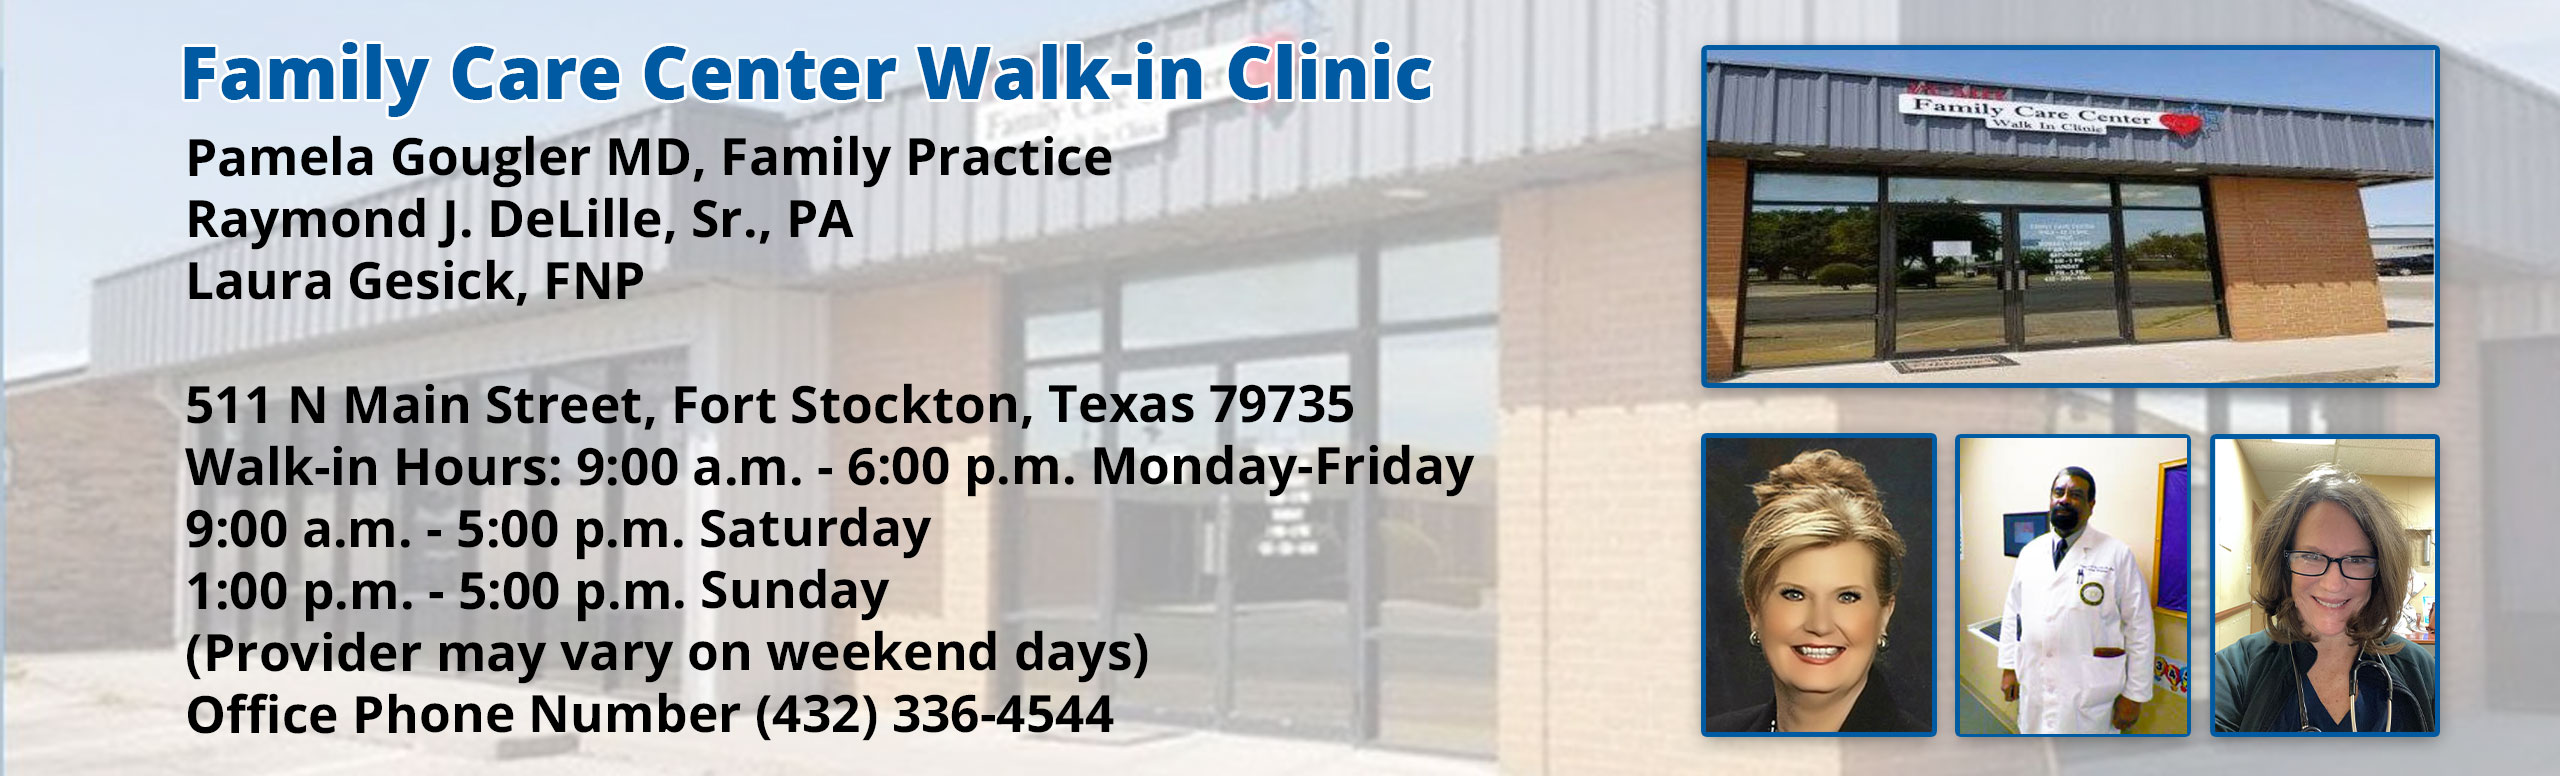 Banner picture of Pecos County Memorial Hospital Family Care Center Walk-In Clinic and self portraits of Pamela Gougler MD, Family Practice, Raymond J. DeLille, Sr., PA, Samuel Itie, FNP-C

511 N Main Street, Fort Stockton, Texas 79735
Walk-In Hours: 9:00-6:00 p.m. Monday-Friday
9:00 a.m.-5:00 p.m. Sunday
(Provider may vary on weekend days)
Office Phone Number (432) 336-4544